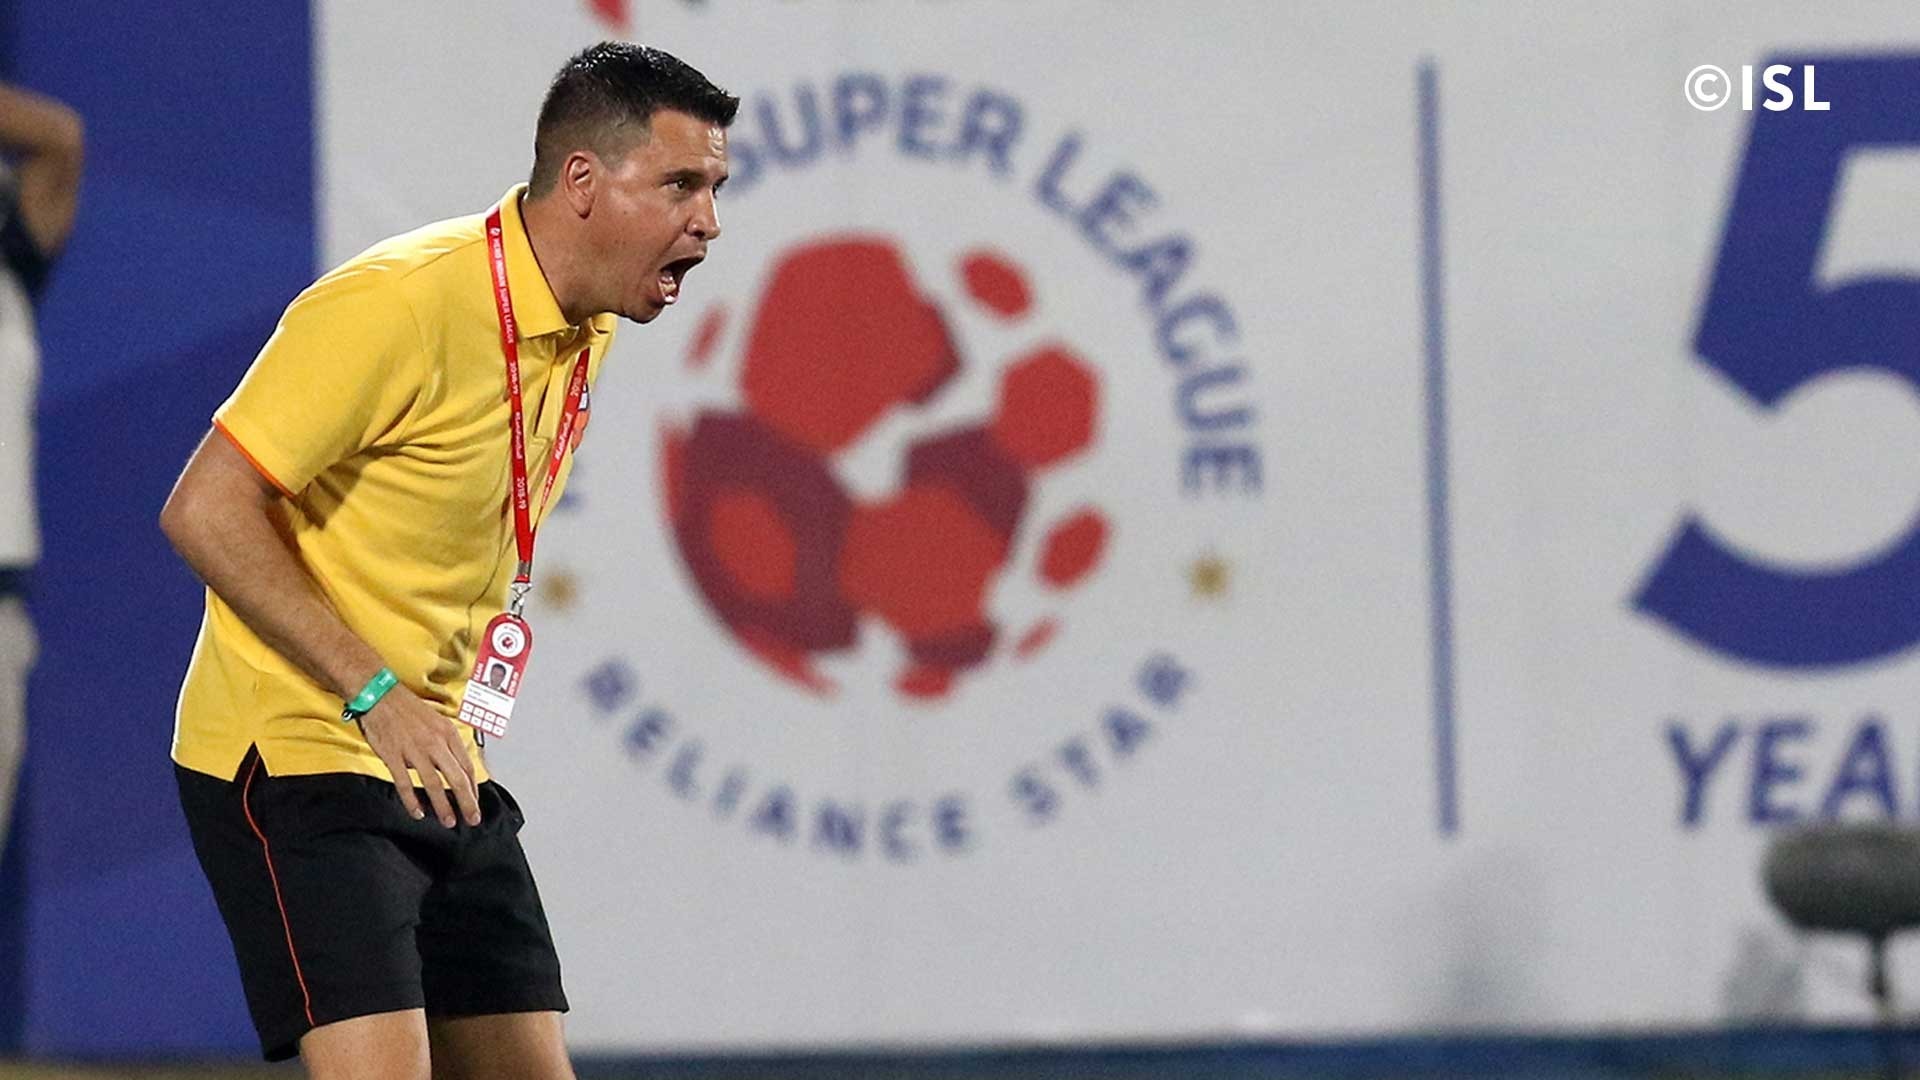 ISL 2019 | May be some of our players were thinking about final, says Sergio Lobera